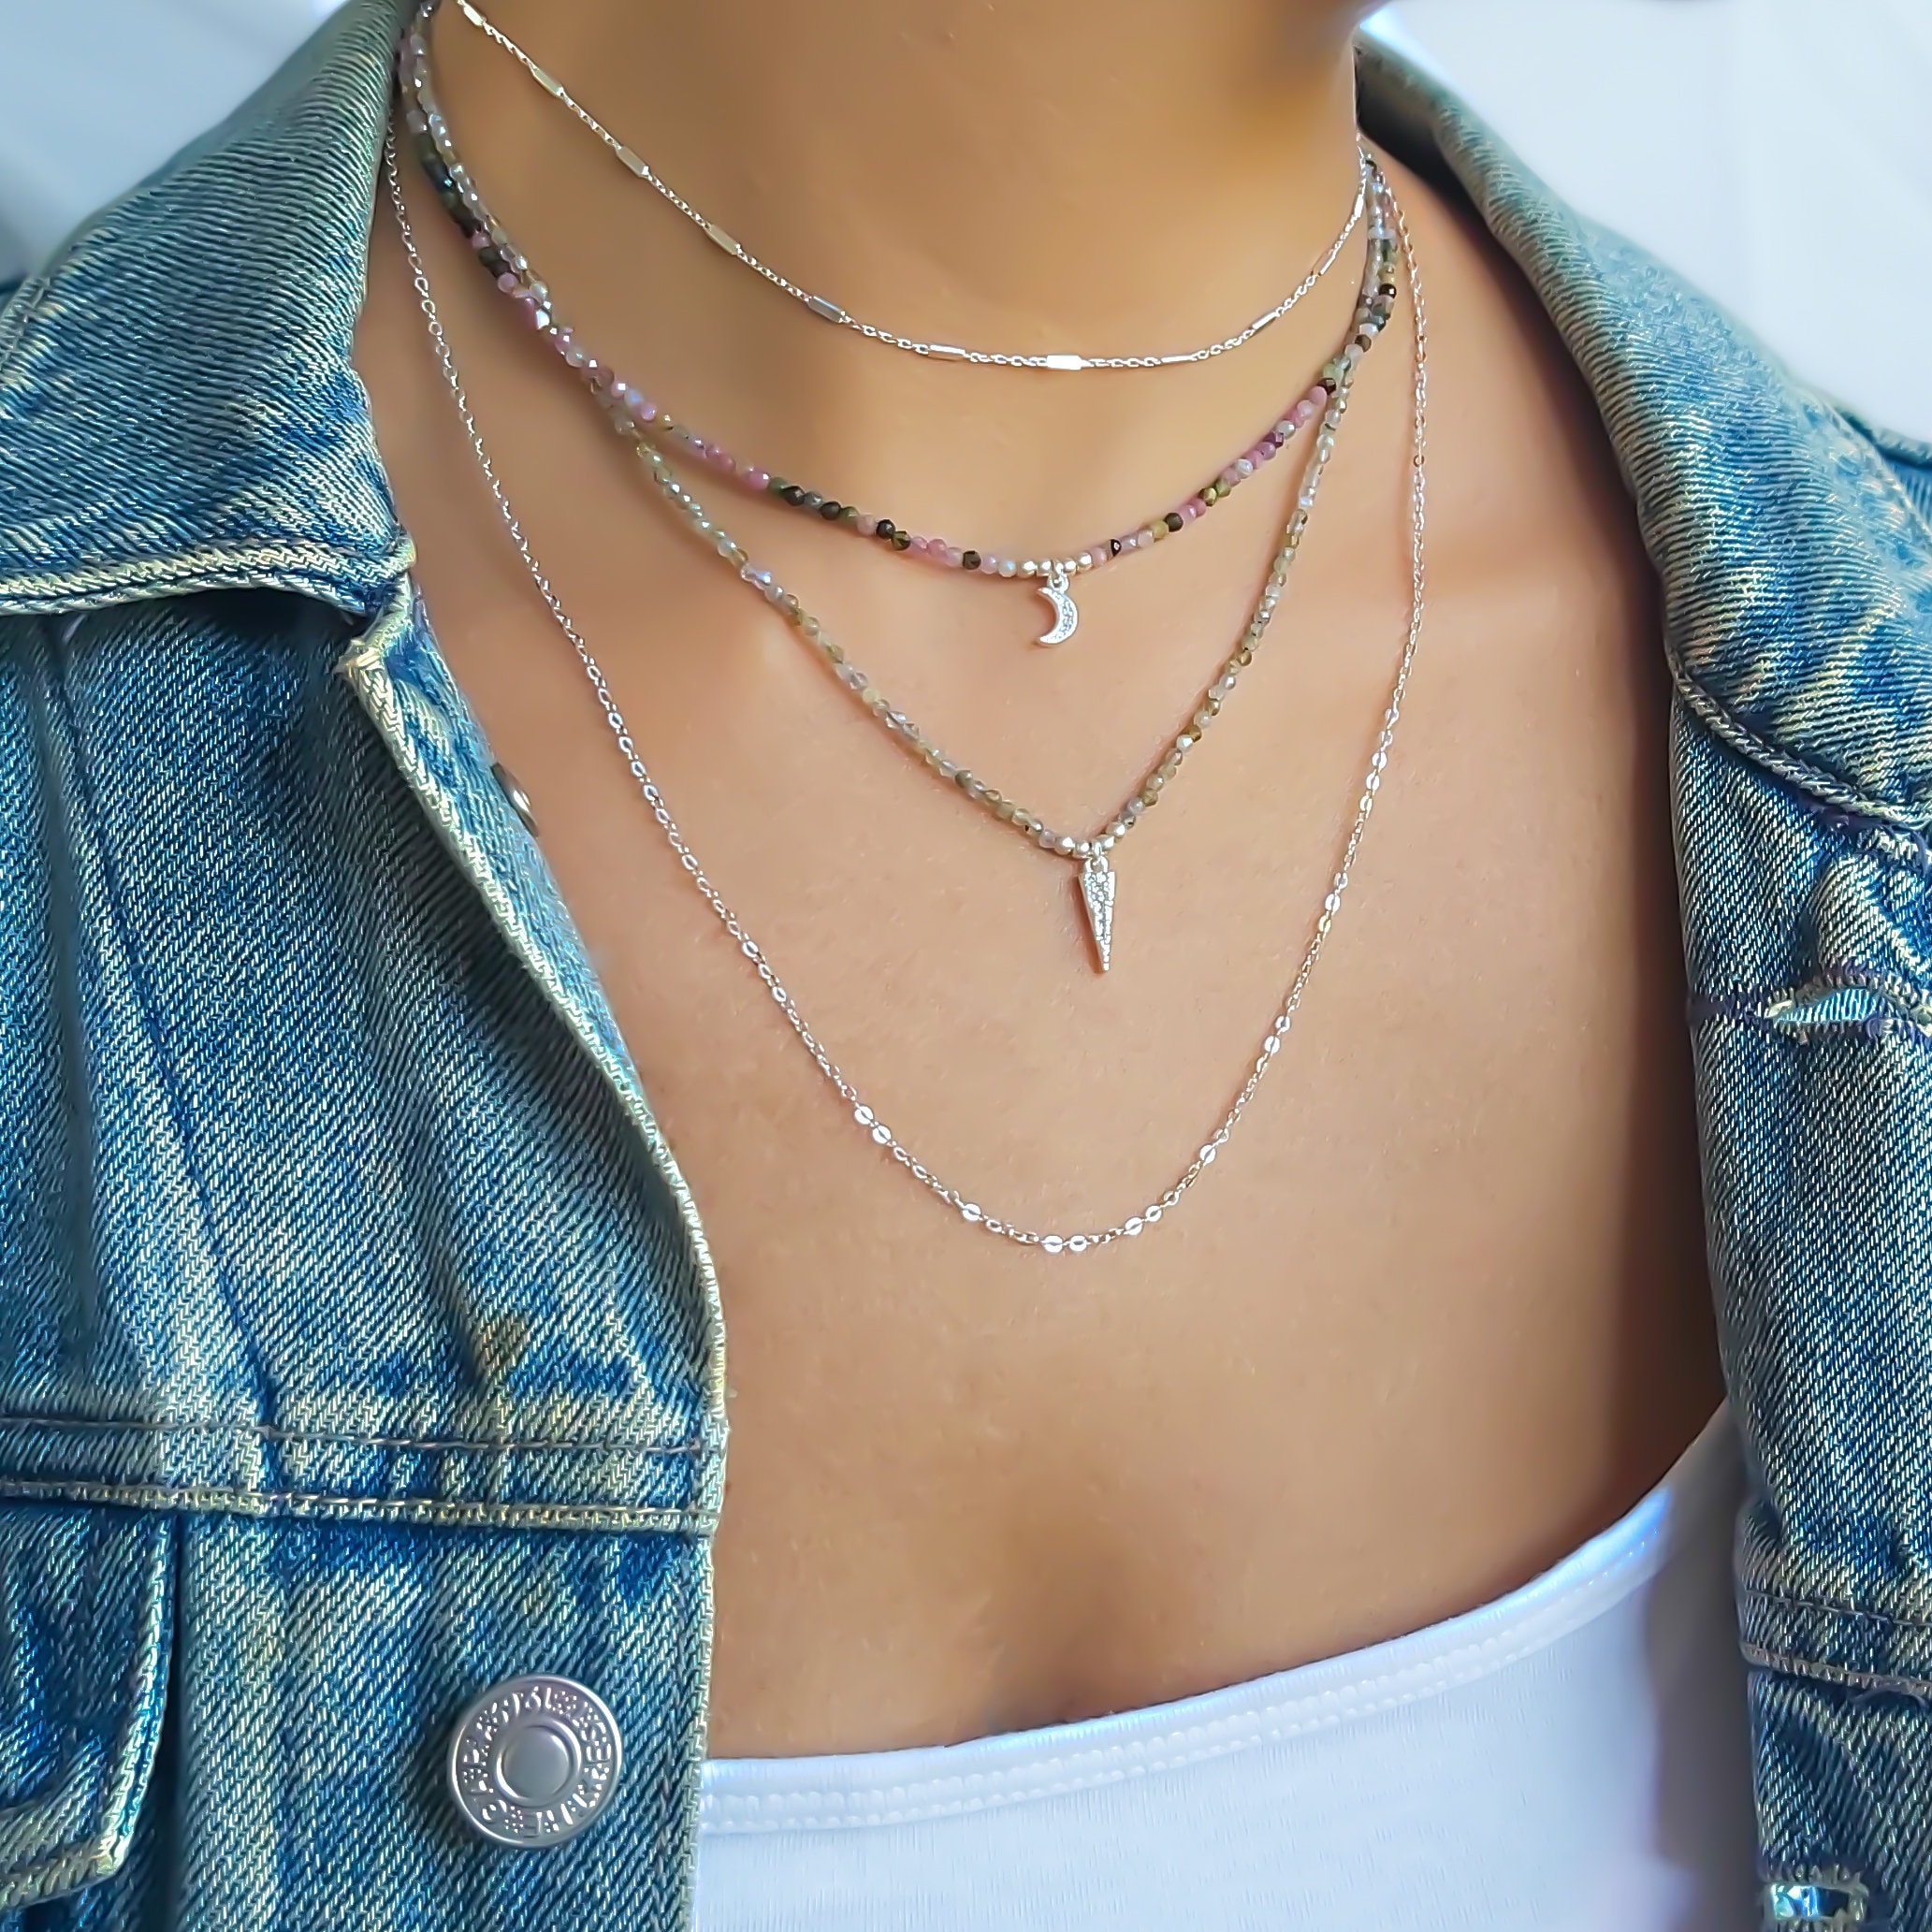 Faye Dainty Thin Silver Chain Necklace - Waterproof Chains